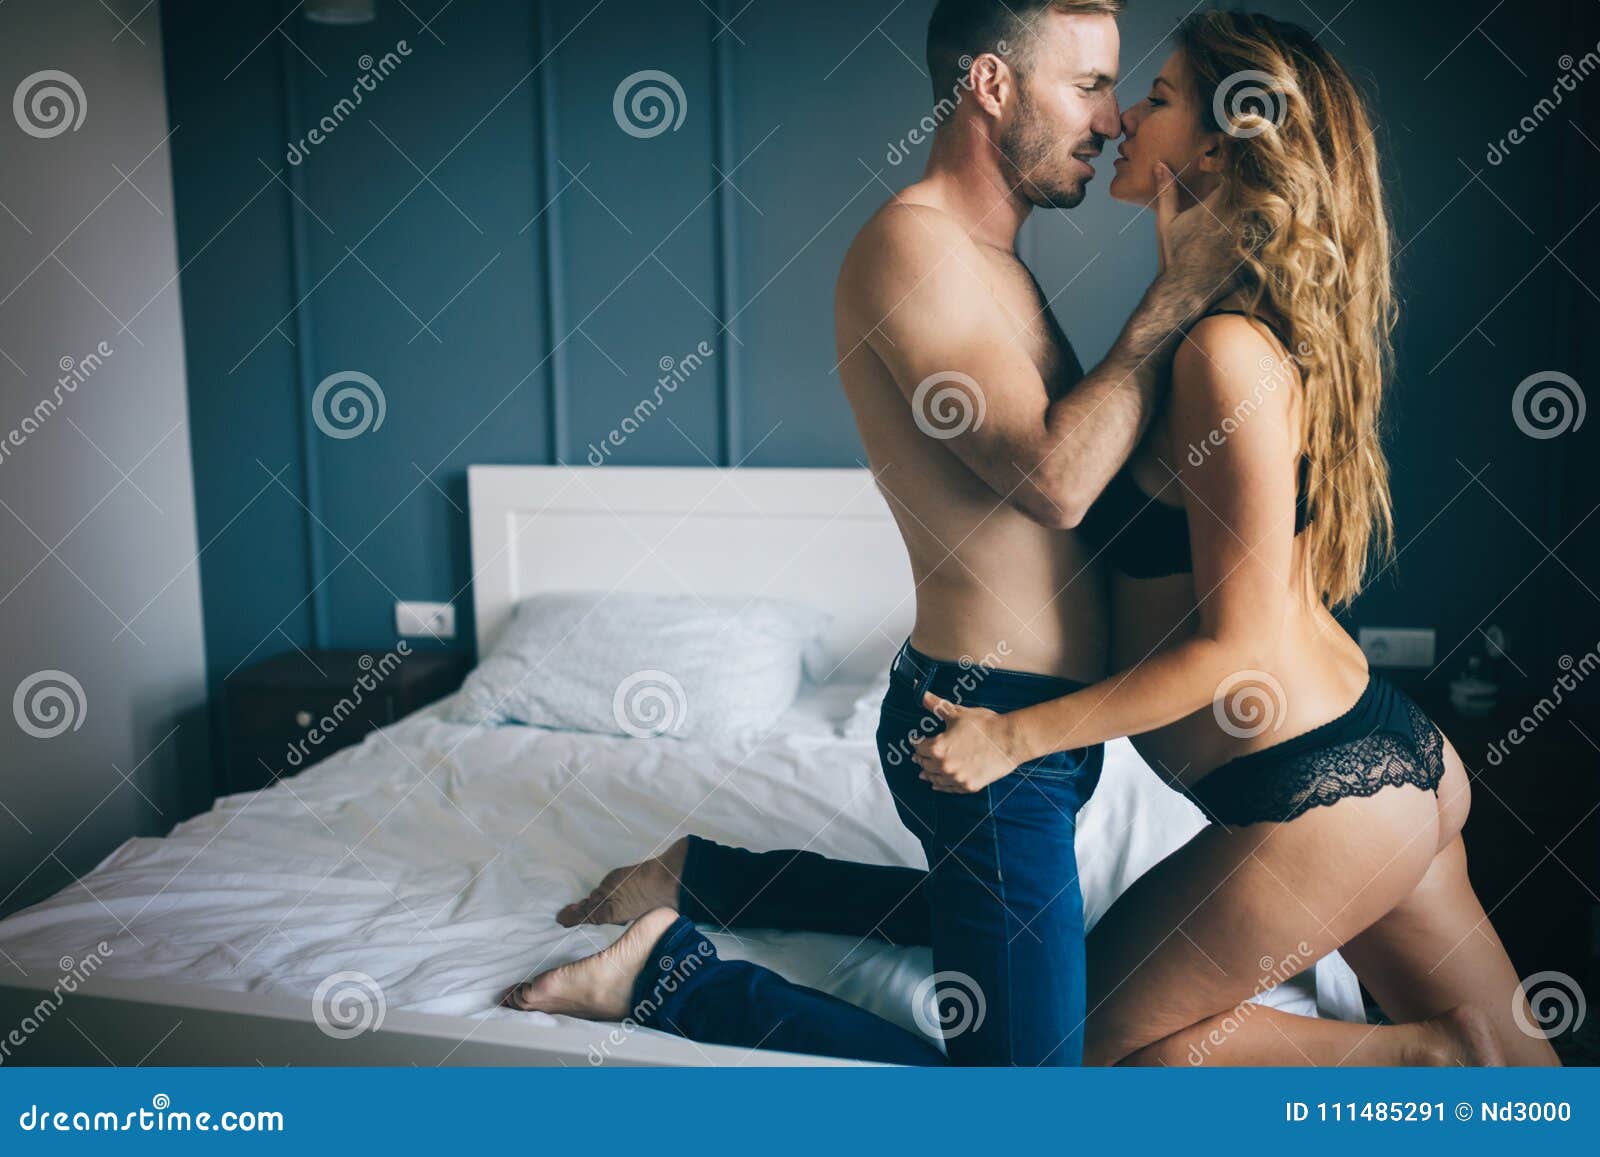 Back View of Woman in Black Panties Holding Her Bra while Man is Lying on Bed Stock Image picture